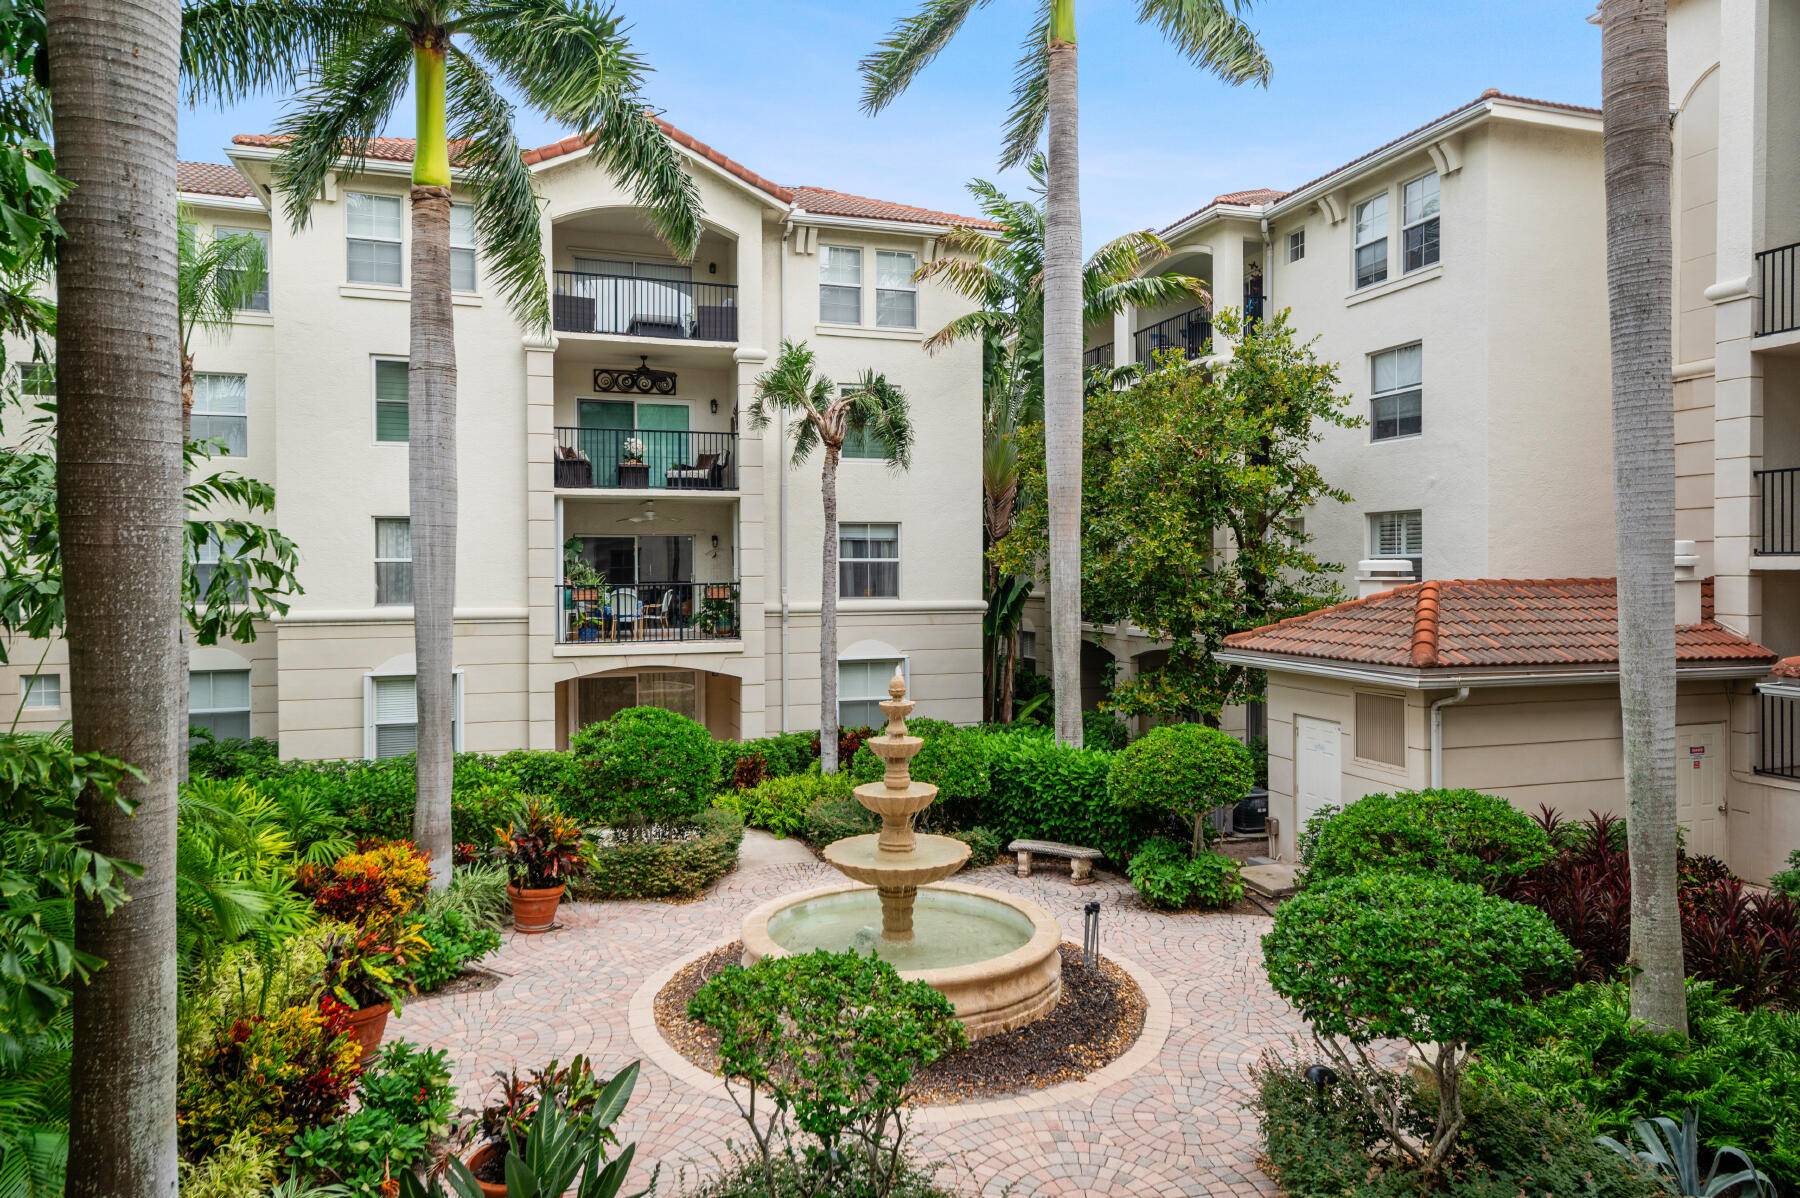 Tuscany on the Intracoastal, a gated, EAST condo community with wonderful amenities Pool on intracoastal, indoor basketball, club room, tennis Walk to shopping or dining.